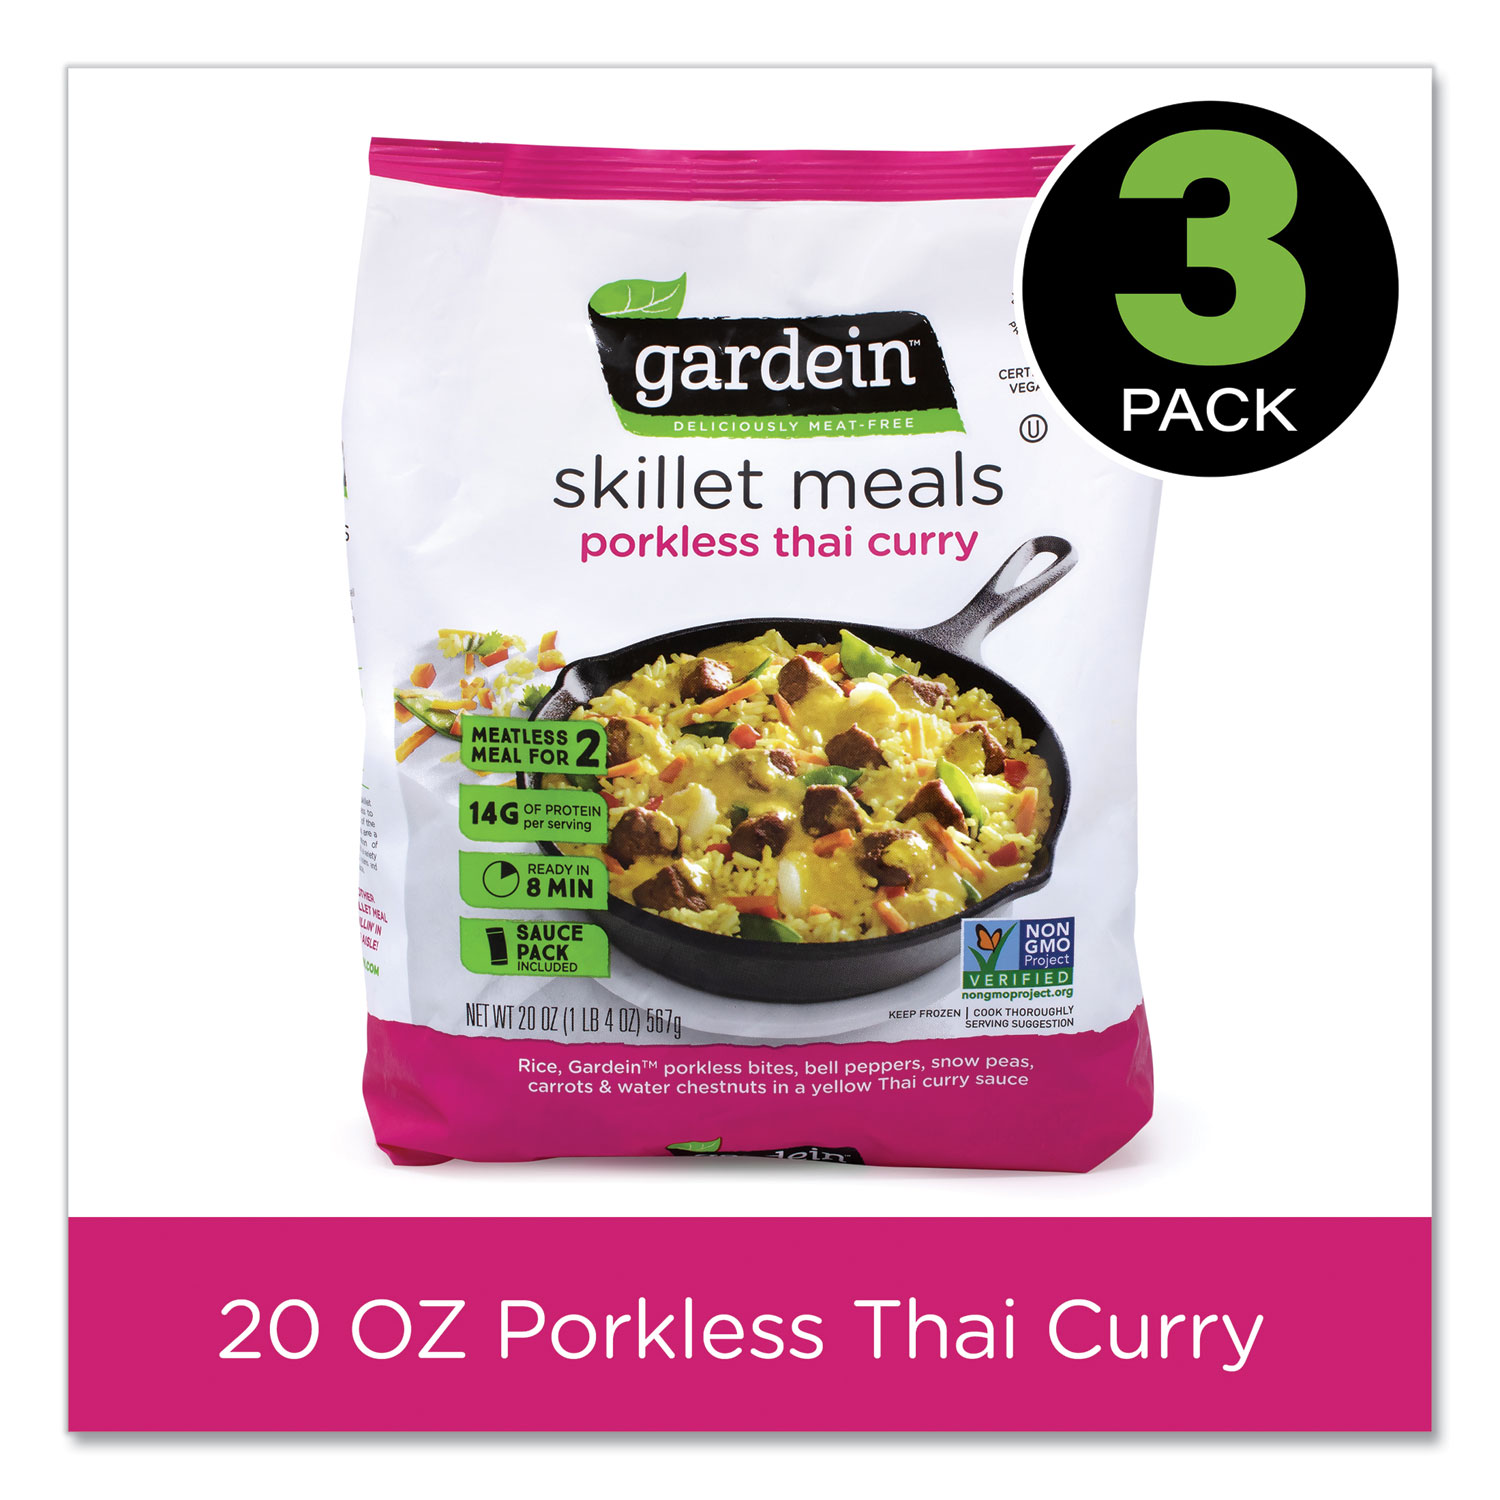  gardein 4223400345 Skillet Meal Thai Porless Curry, 20 oz Bag, 3/Pack, Free Delivery in 1-4 Business Days (GRR90300159) 